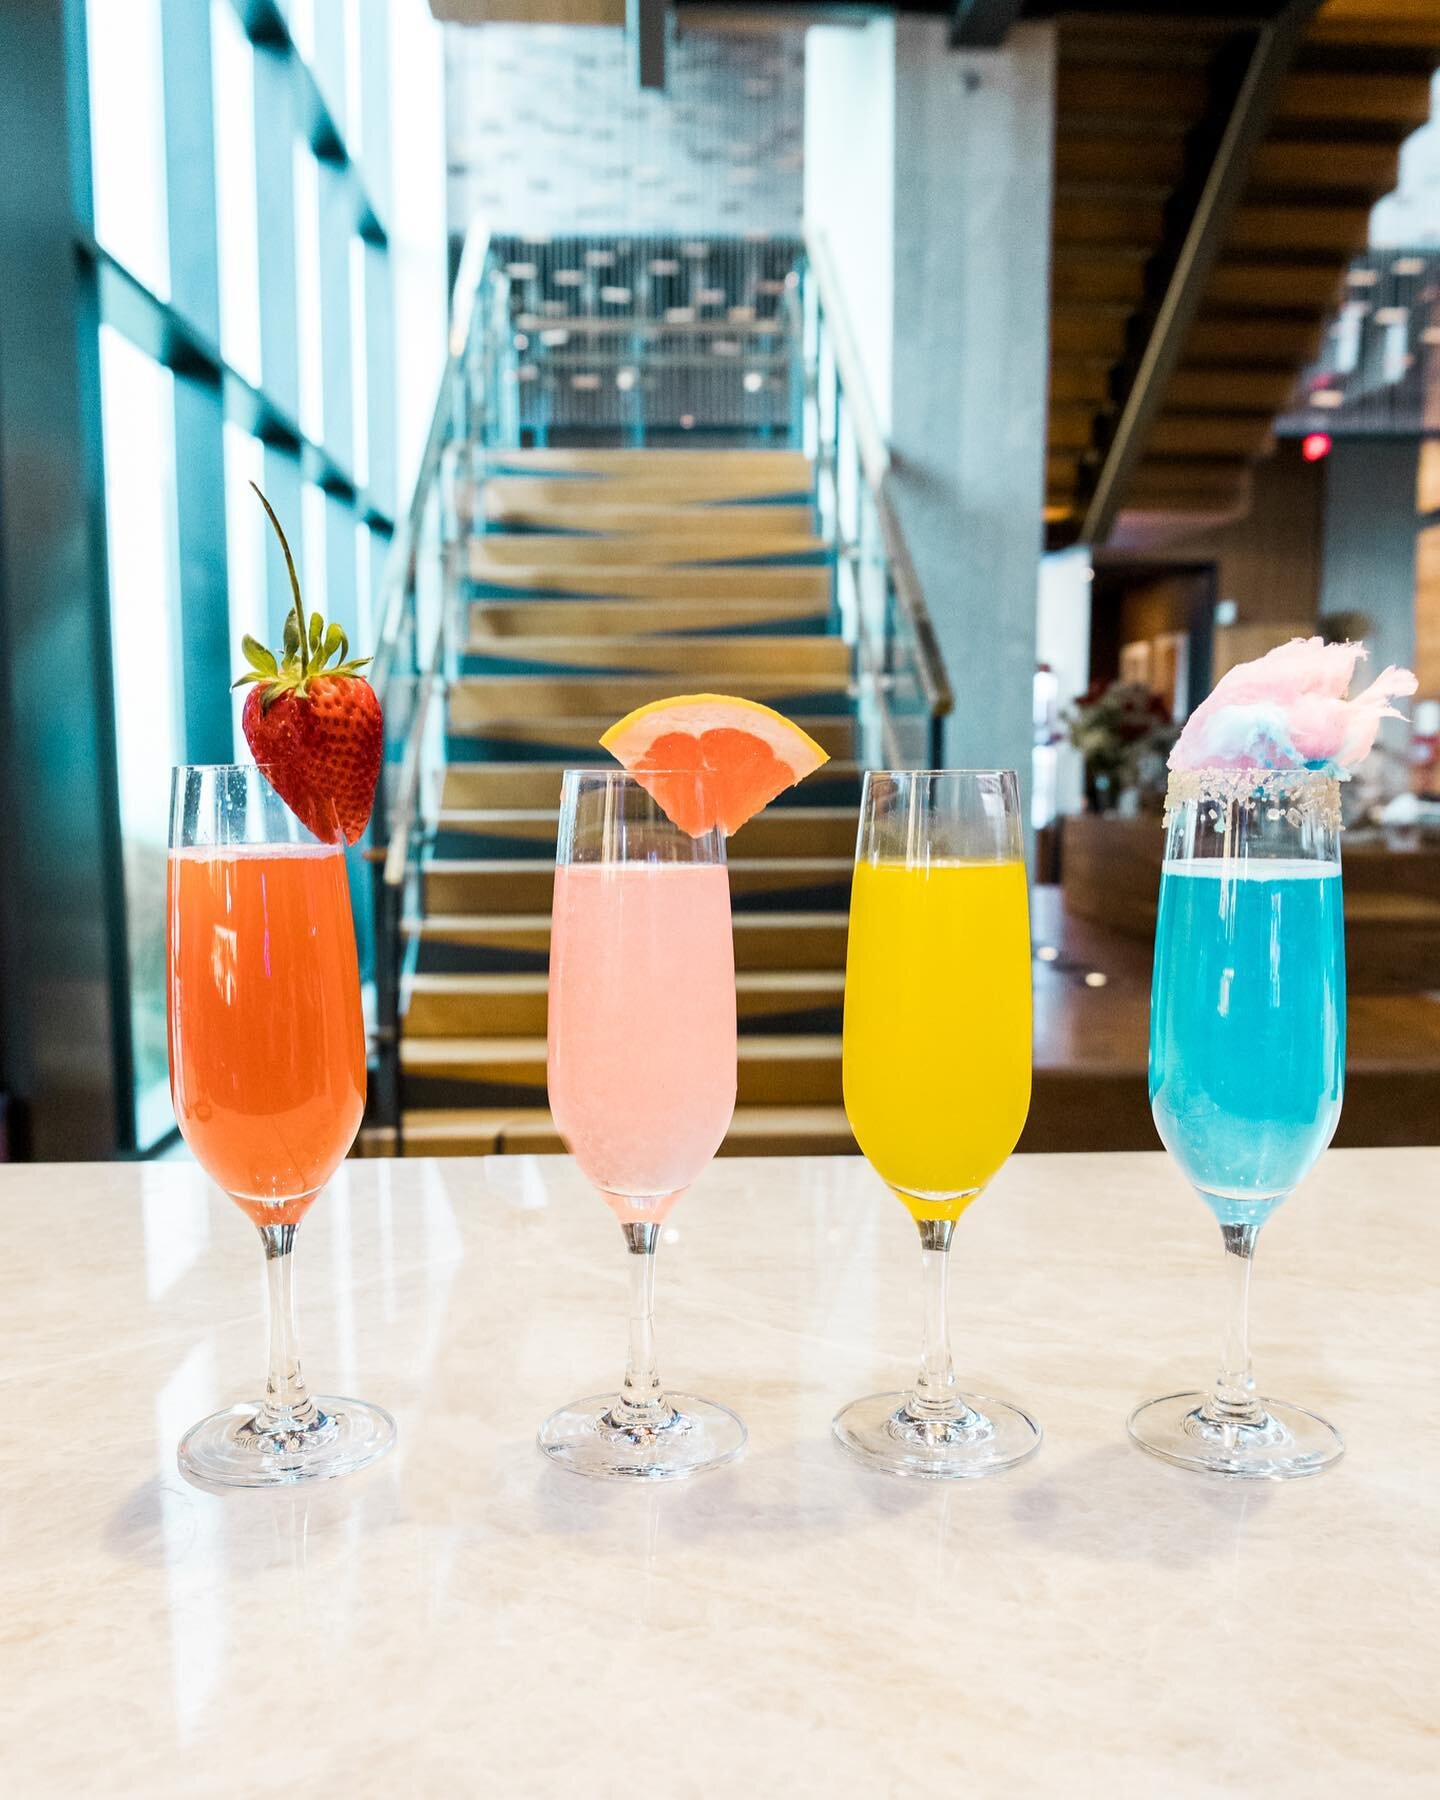 Celebrate Mom this Mother's Day with quality time and a delicious brunch at Barrel &amp; Derrick Sunday, May 14, 2023, from 10 AM- 2 PM. (Reservation Required)

Make a toast to Mom with a bubbly mimosa at our mimosa bar with ice cream and other fun t